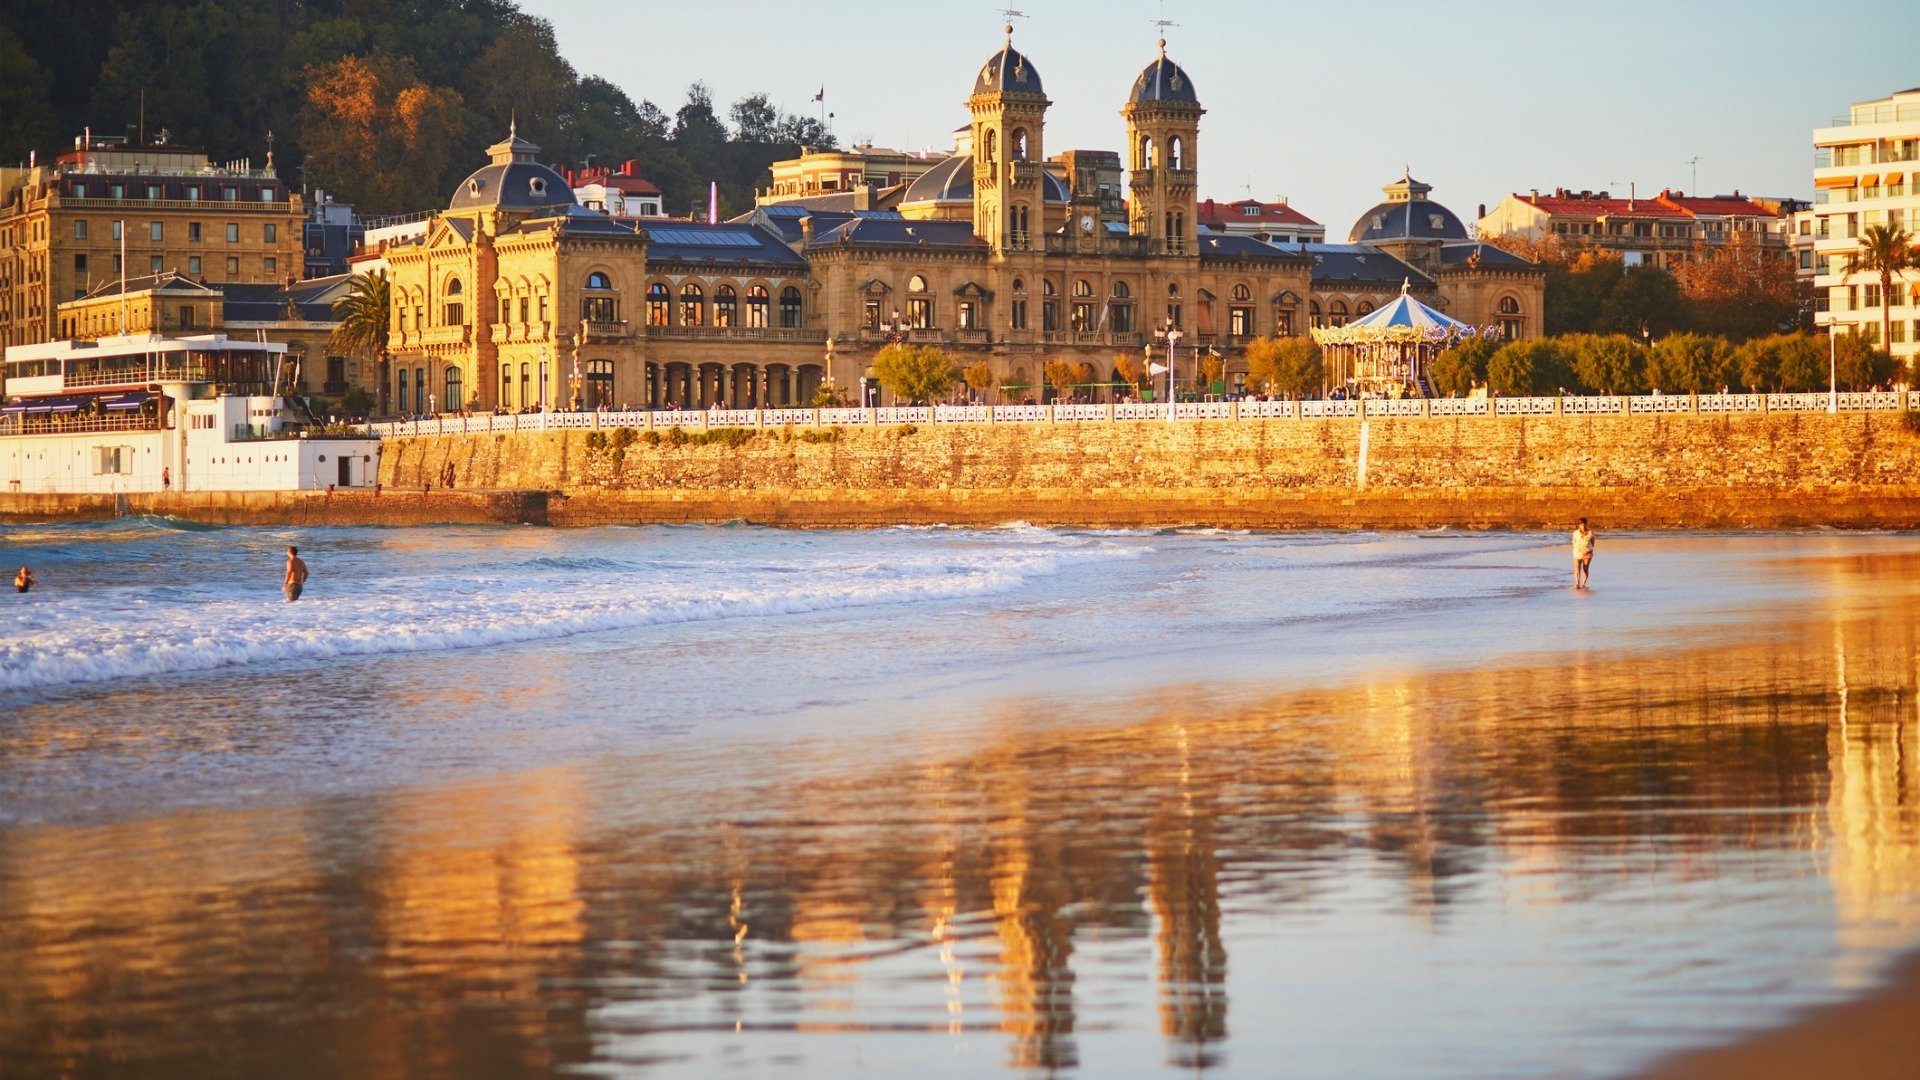 La Concha Beach in the foreground with grand buildings in the background, all dyed in golden sunlight. 